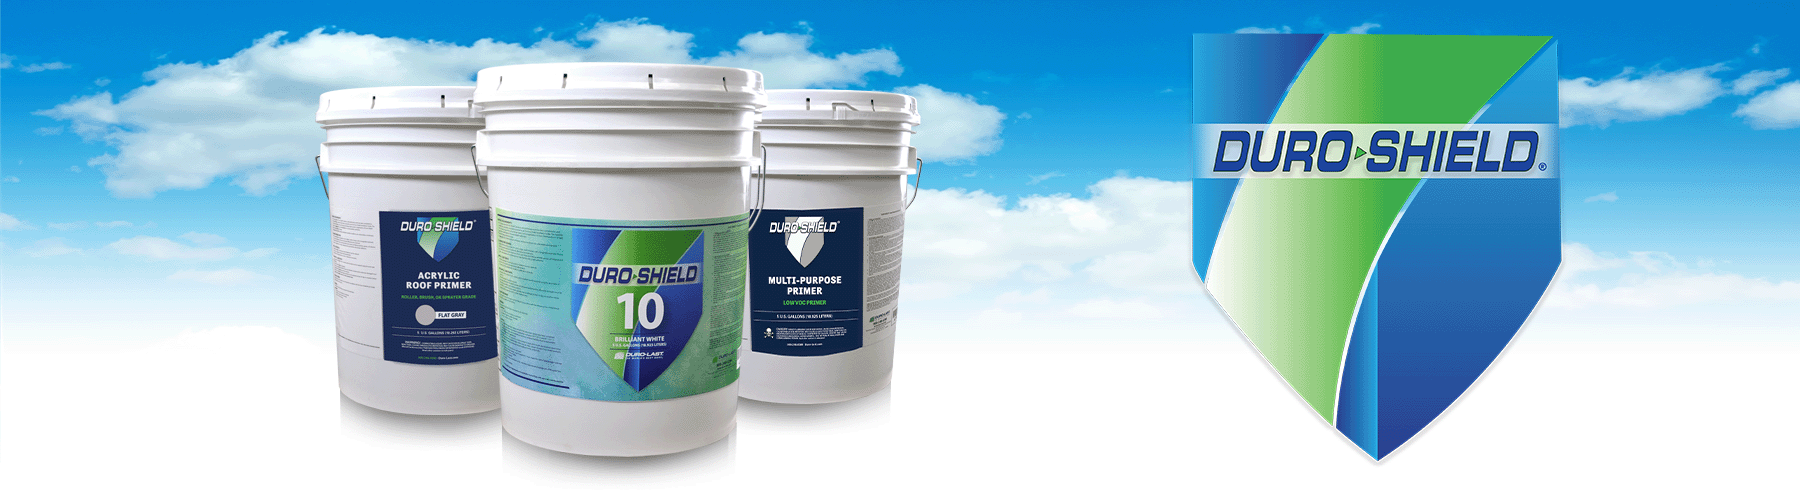 Duro-Shield® Roof Coatings and Materials